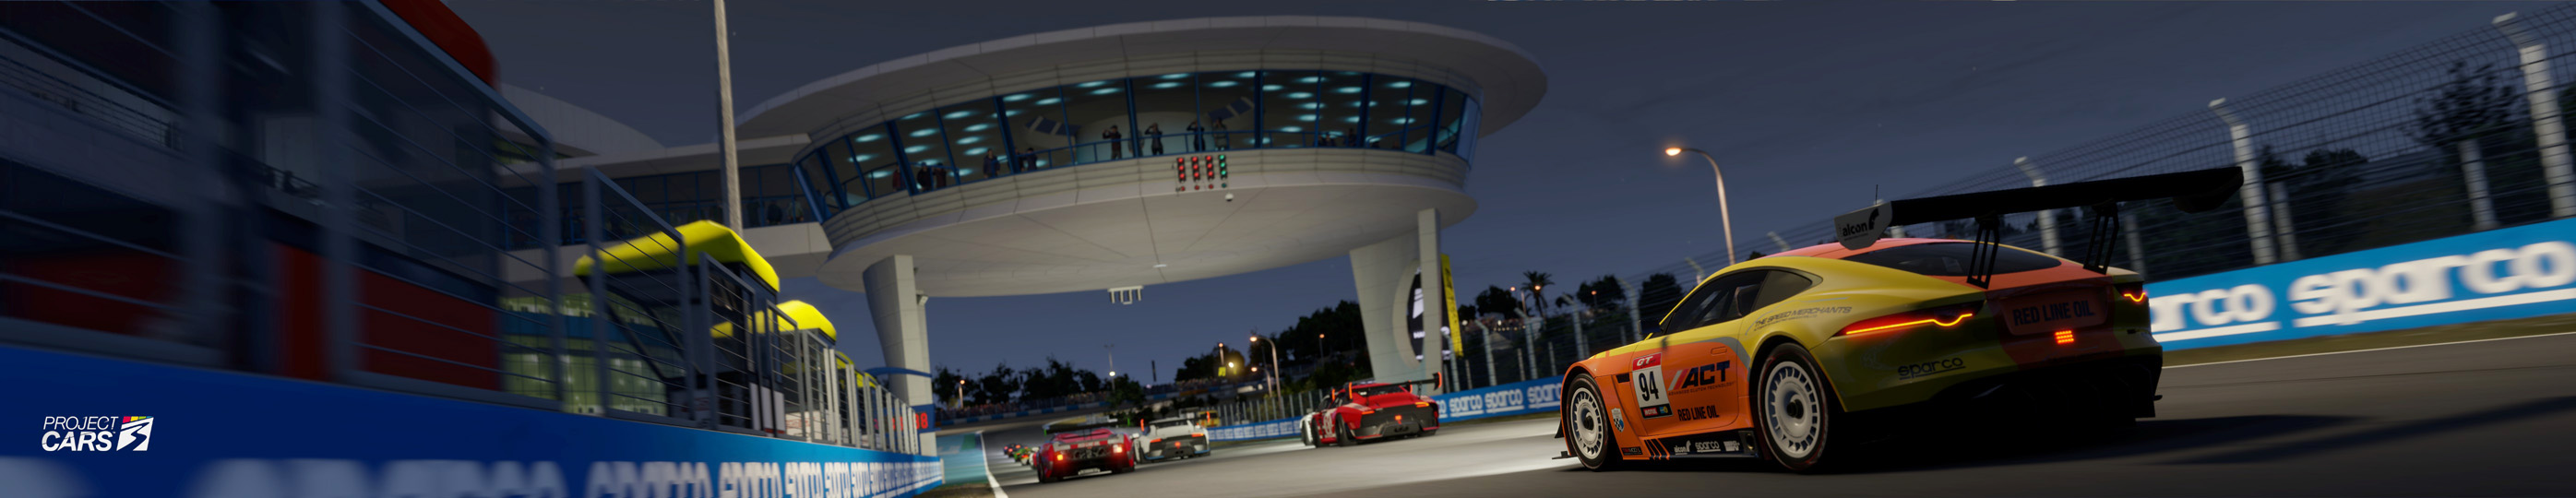 0 PROJECT CARS 3 JAG F TYPE RACING at JEREZ copy.jpg